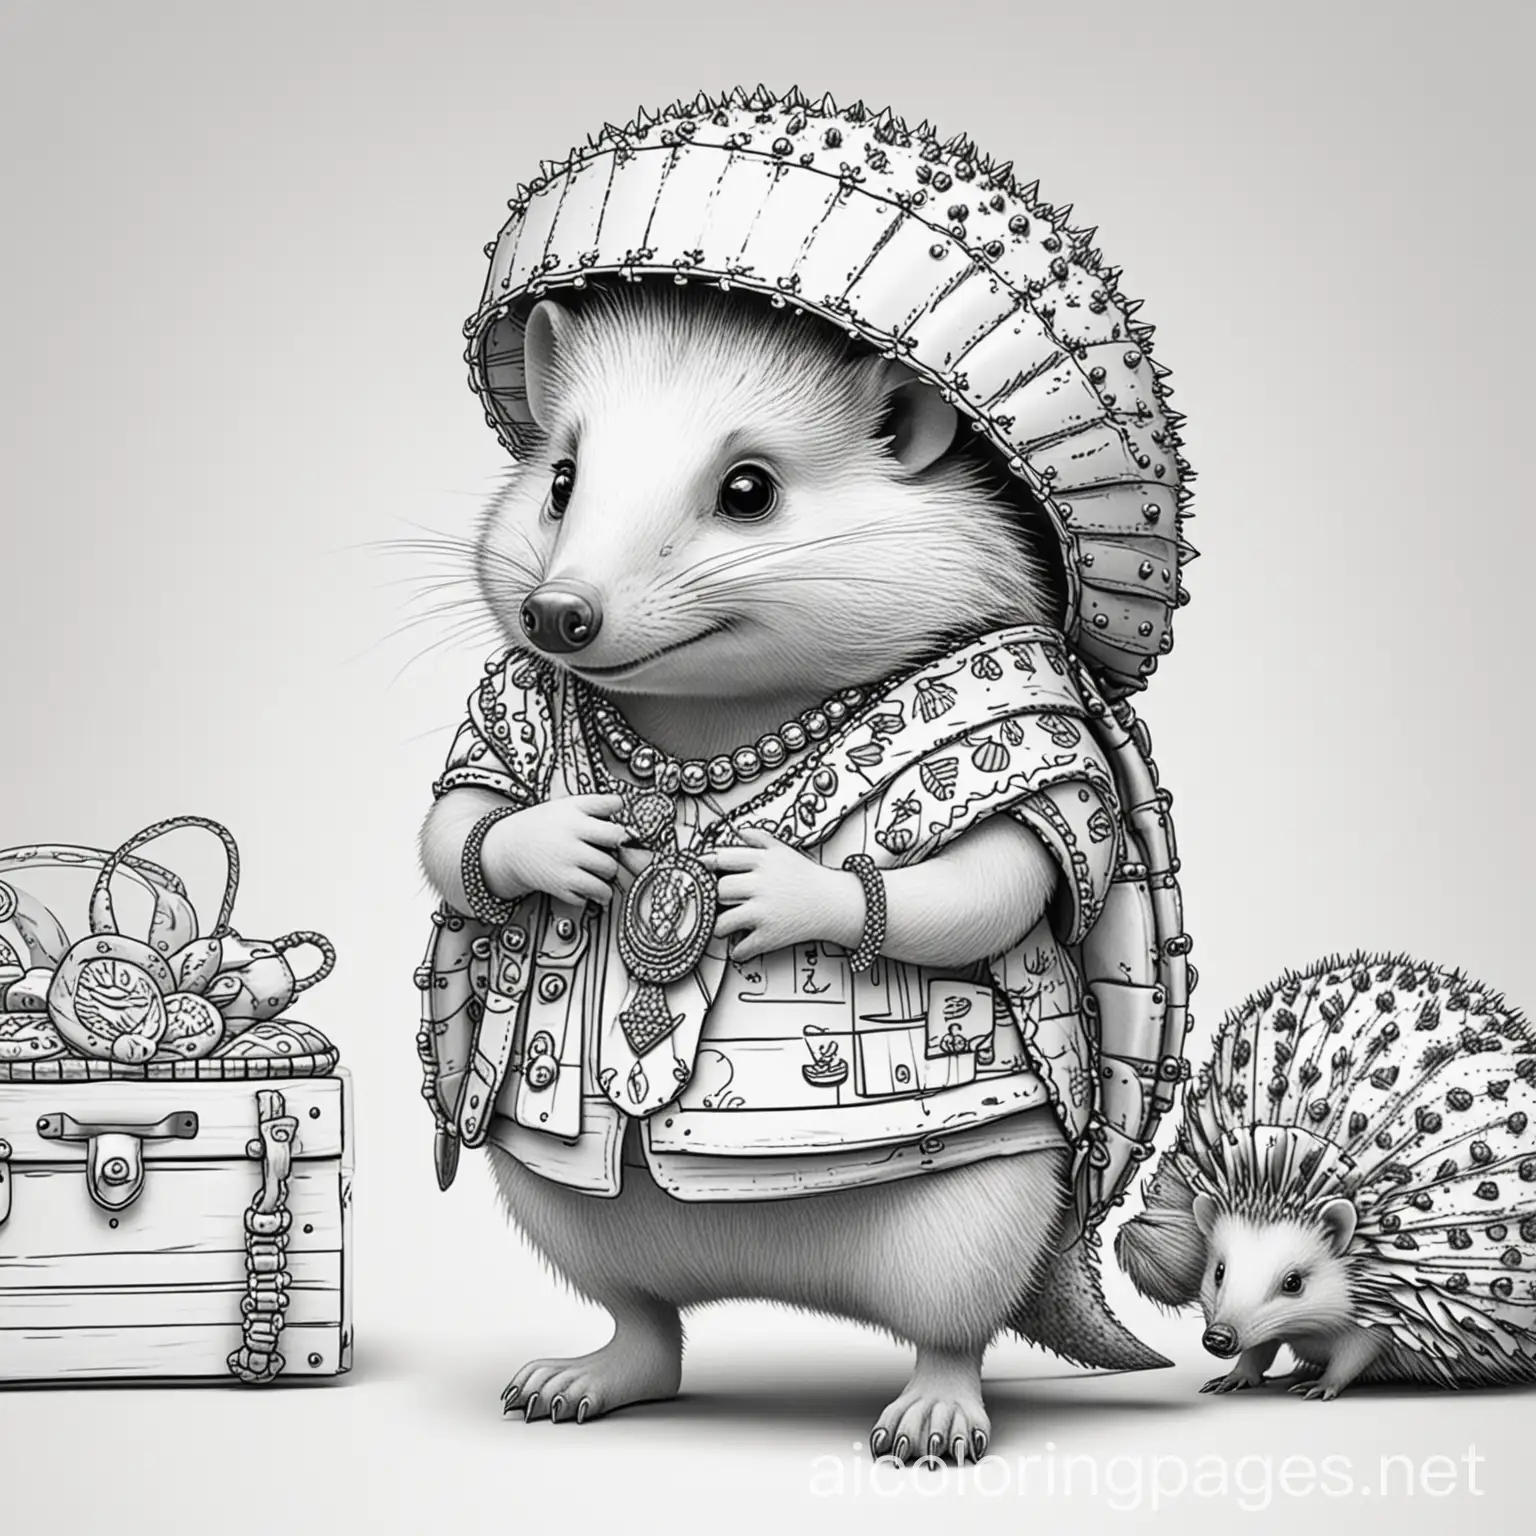 Armadillos cartoon style in clothes have a jewelry shop selling to a hedgehog, Coloring Page, black and white, line art, white background, Simplicity, Ample White Space. The background of the coloring page is plain white to make it easy for young children to color within the lines. The outlines of all the subjects are easy to distinguish, making it simple for kids to color without too much difficulty